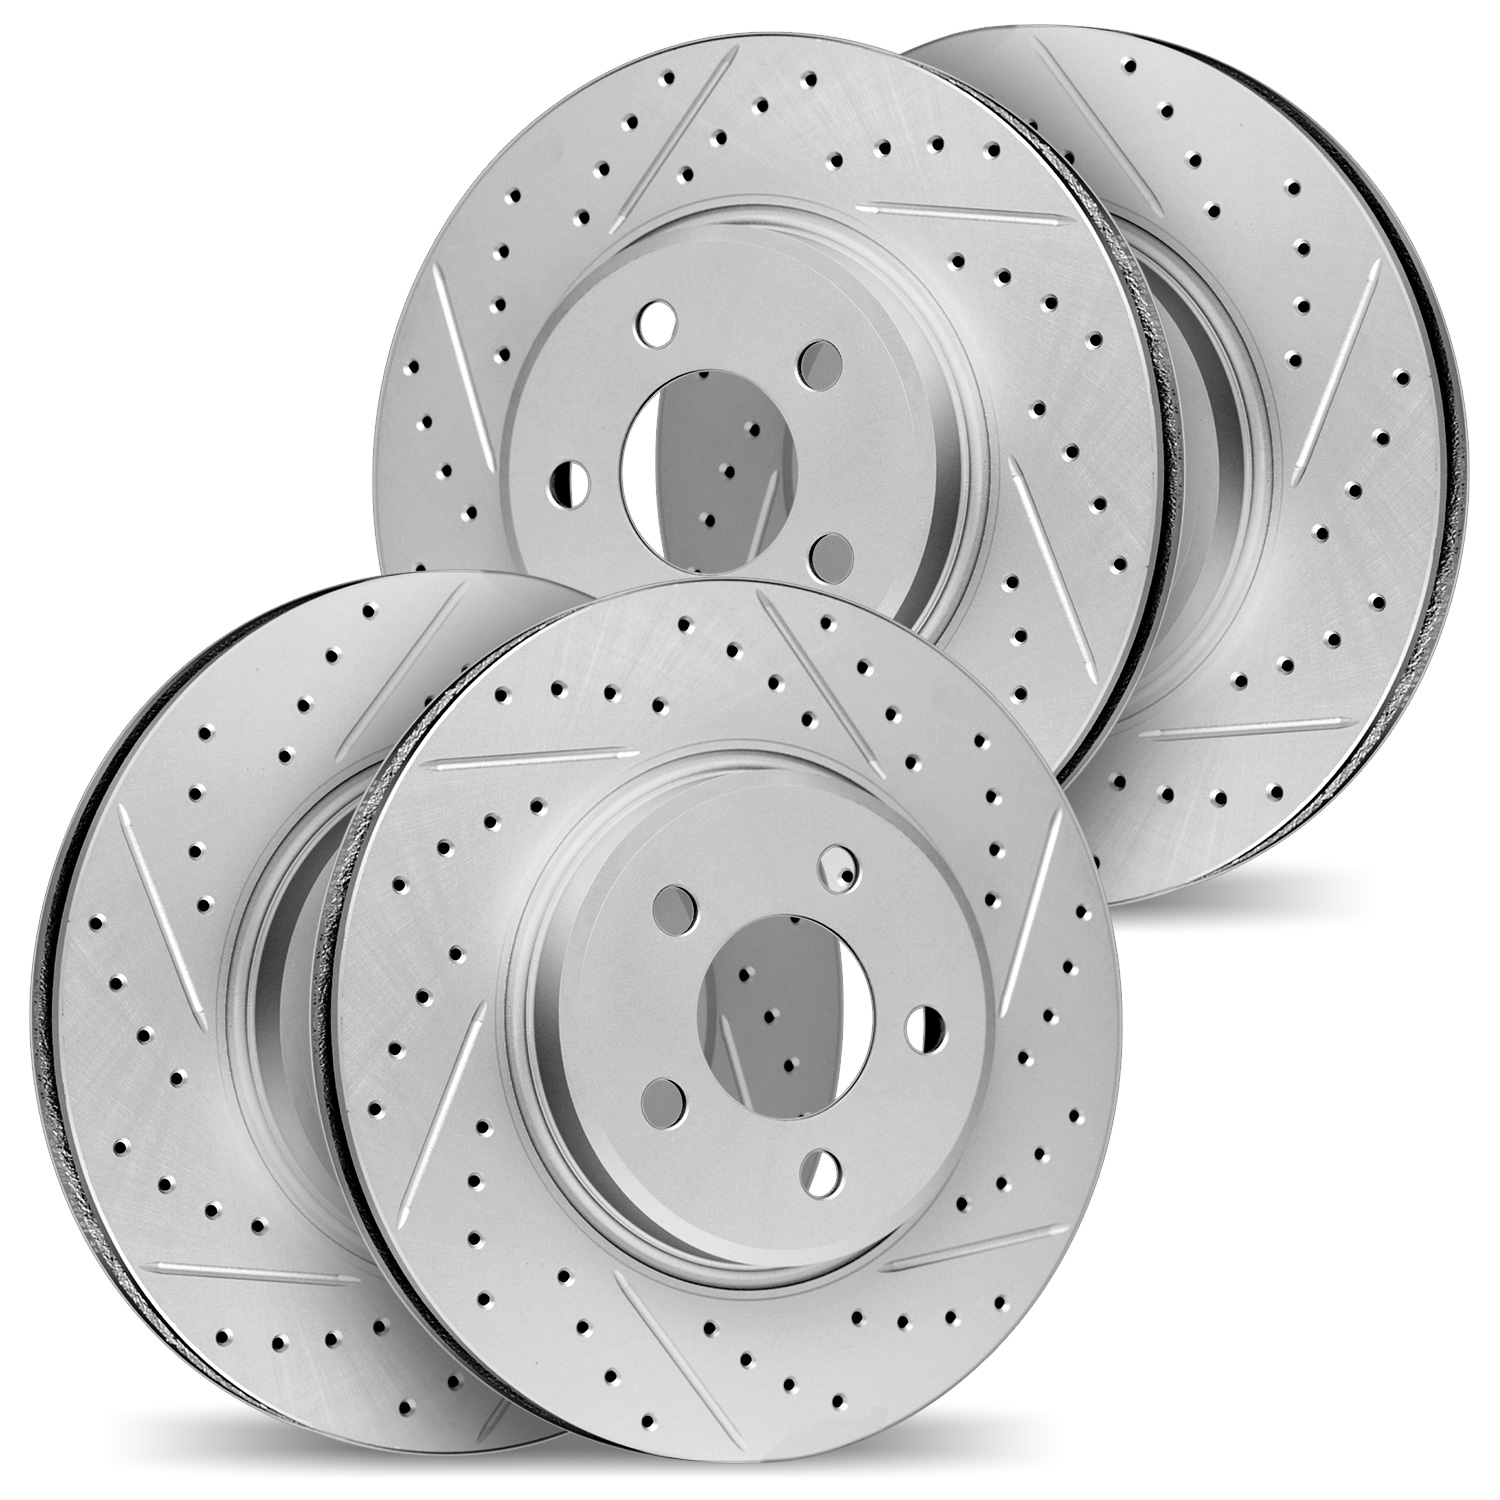 2004-11016 Geoperformance Drilled/Slotted Brake Rotors, 2006-2009 Land Rover, Position: Front and Rear